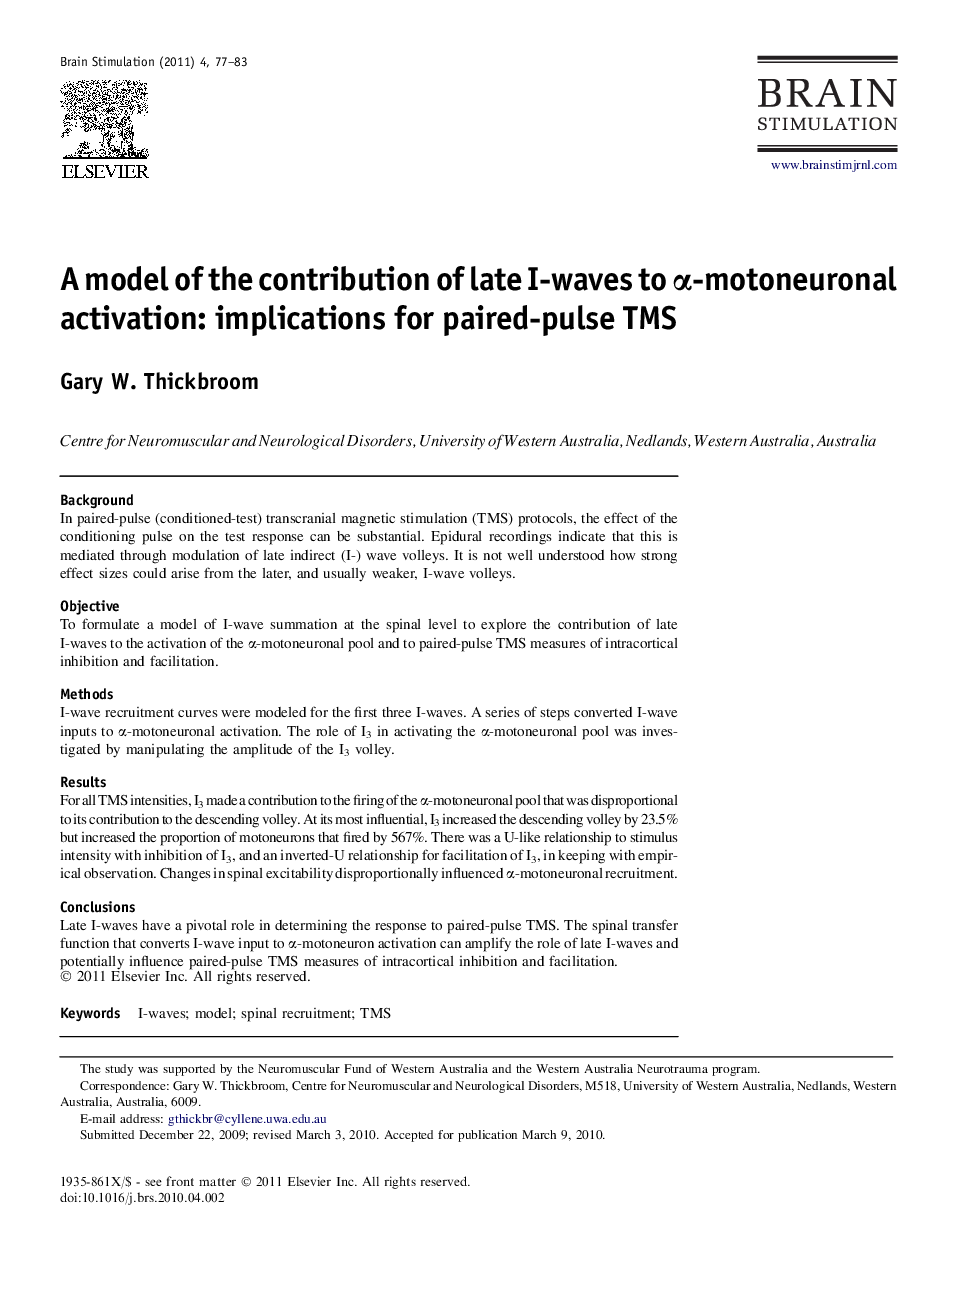 A model of the contribution of late I-waves to α-motoneuronal activation: implications for paired-pulse TMS 